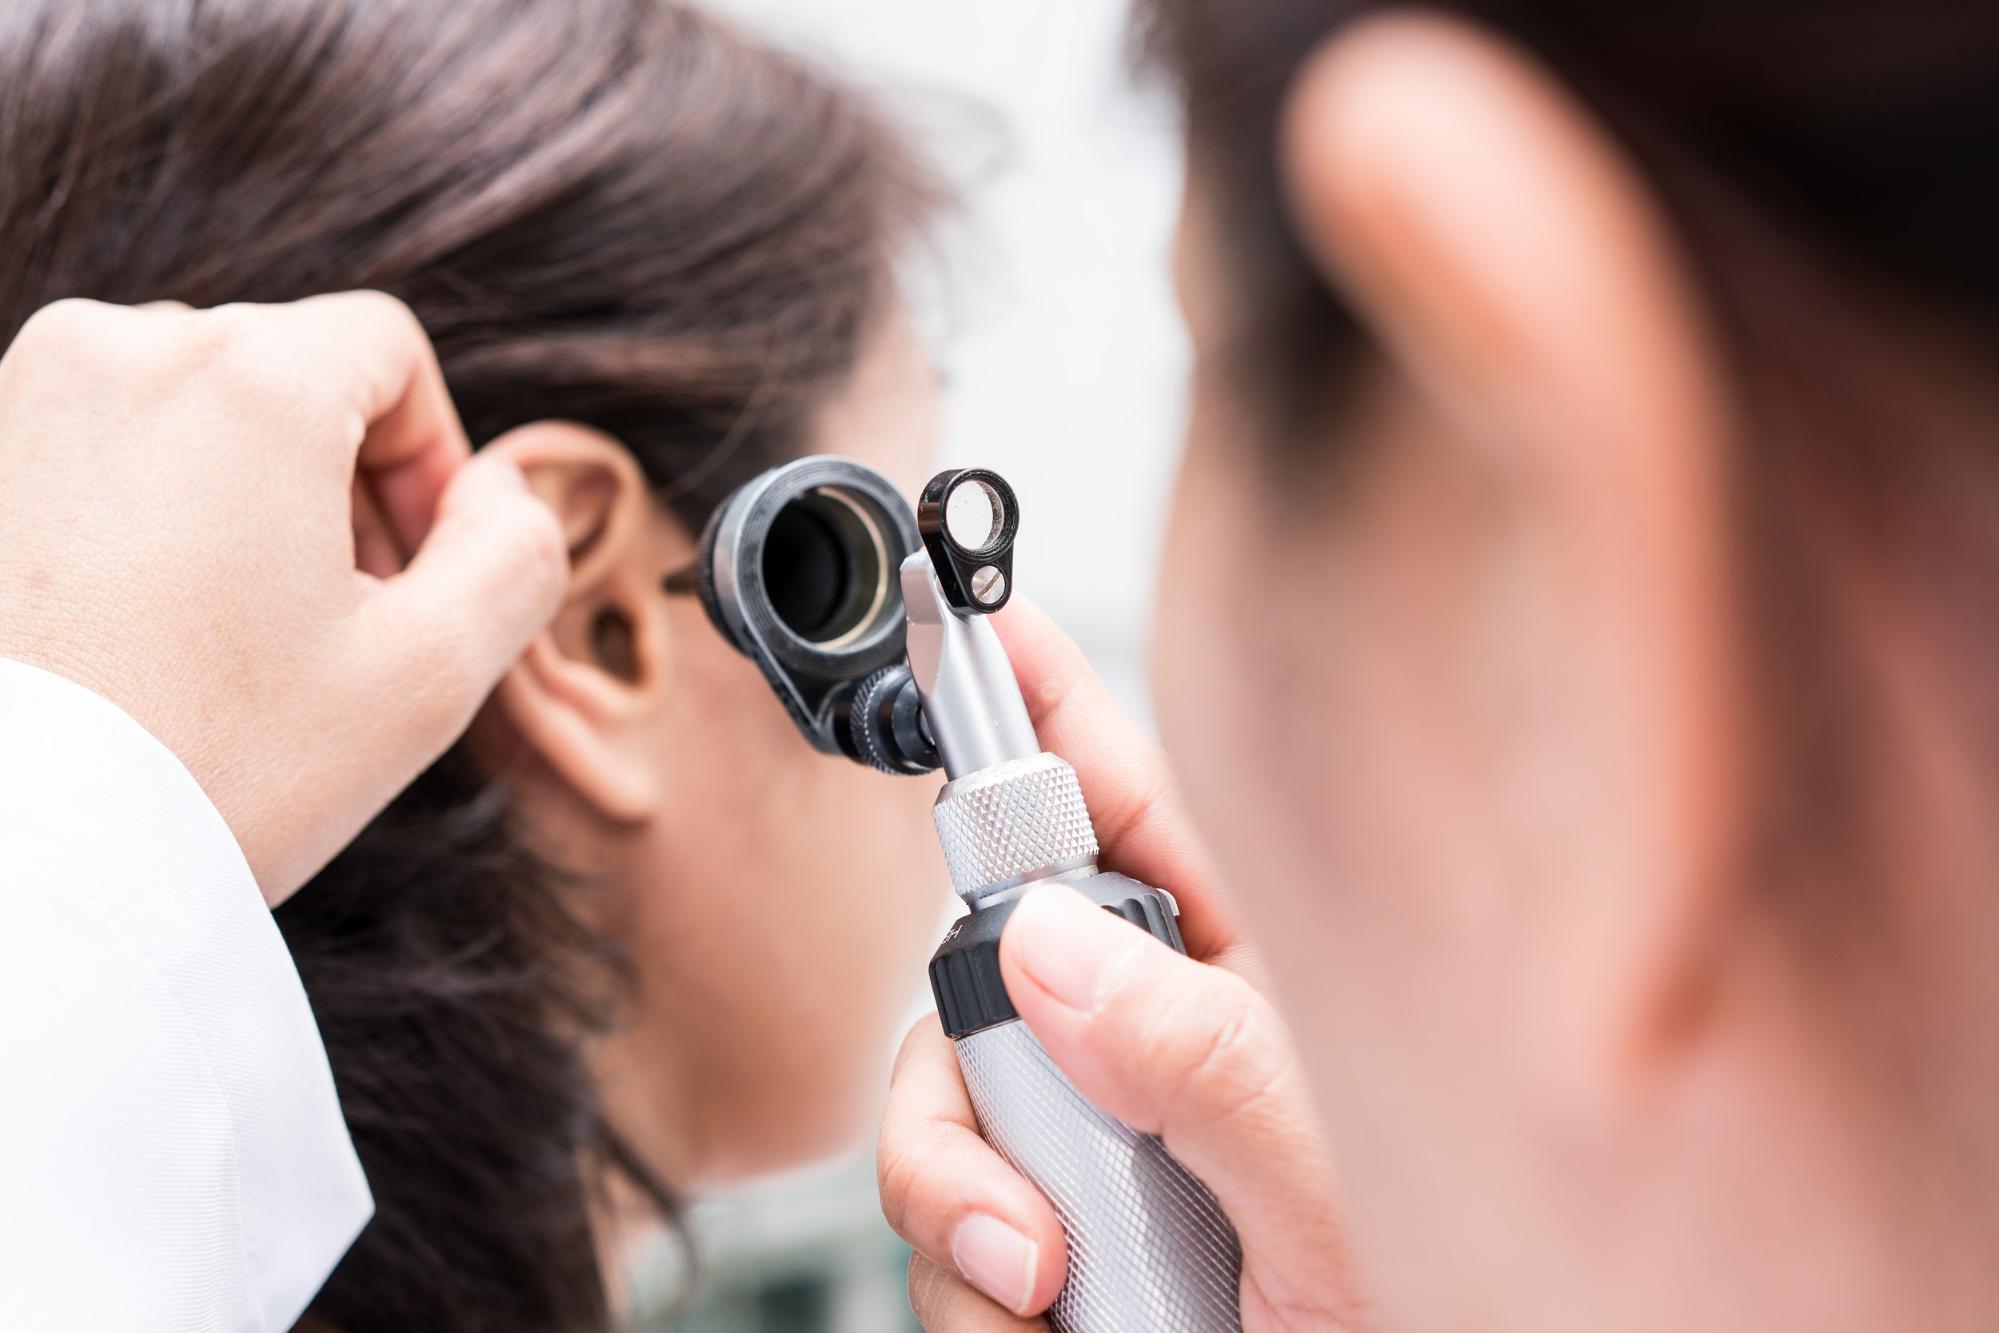 is hearing loss a disability: Doctor examining a patient's ear